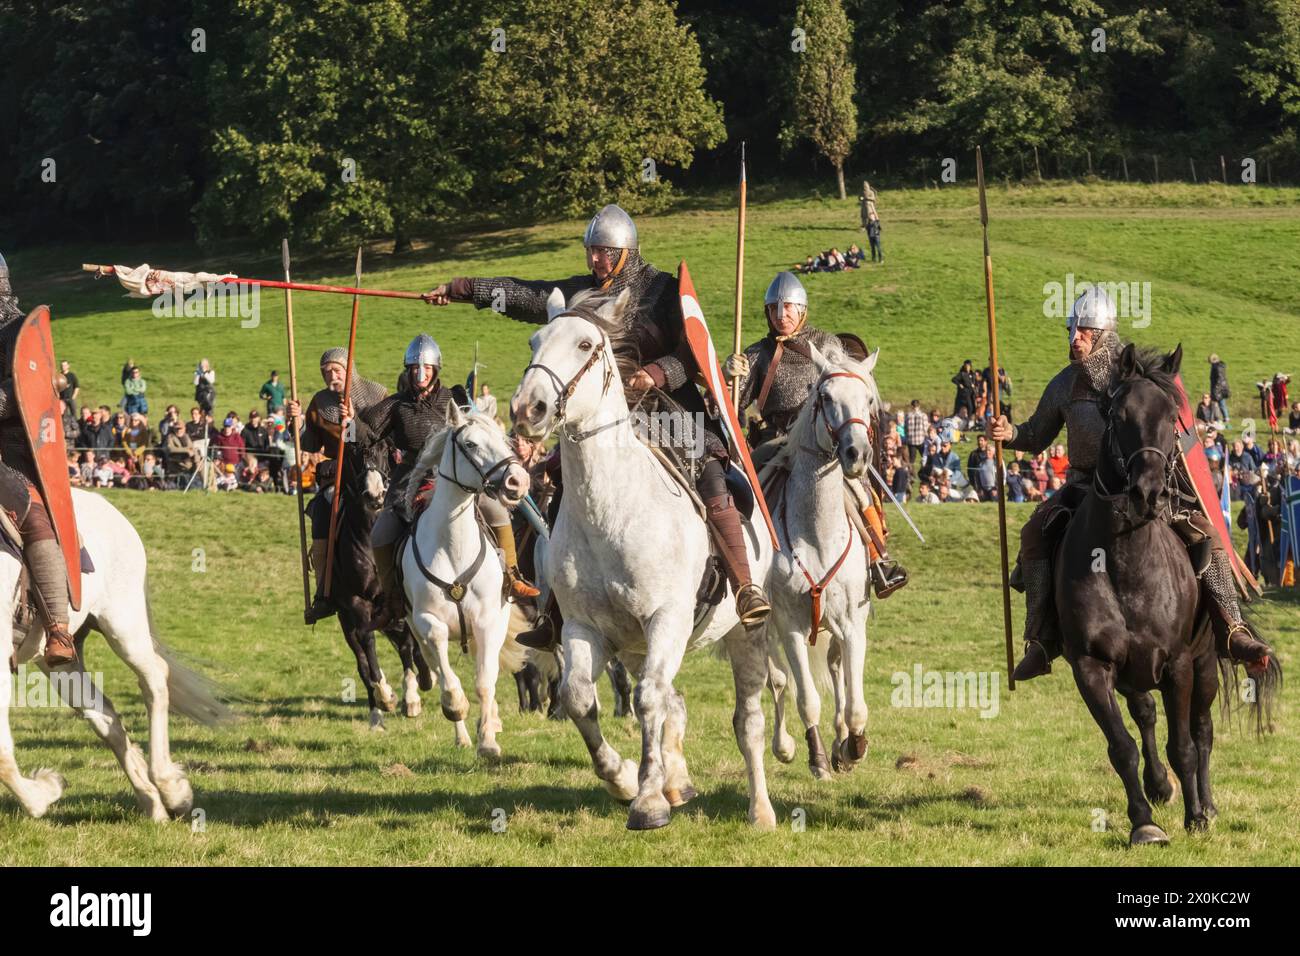 England, East Sussex, Battle, The Annual October Battle of Hastings Re-enactment Festival, Norman Knights on Horseback Dressed in Medieval Armour Stock Photo